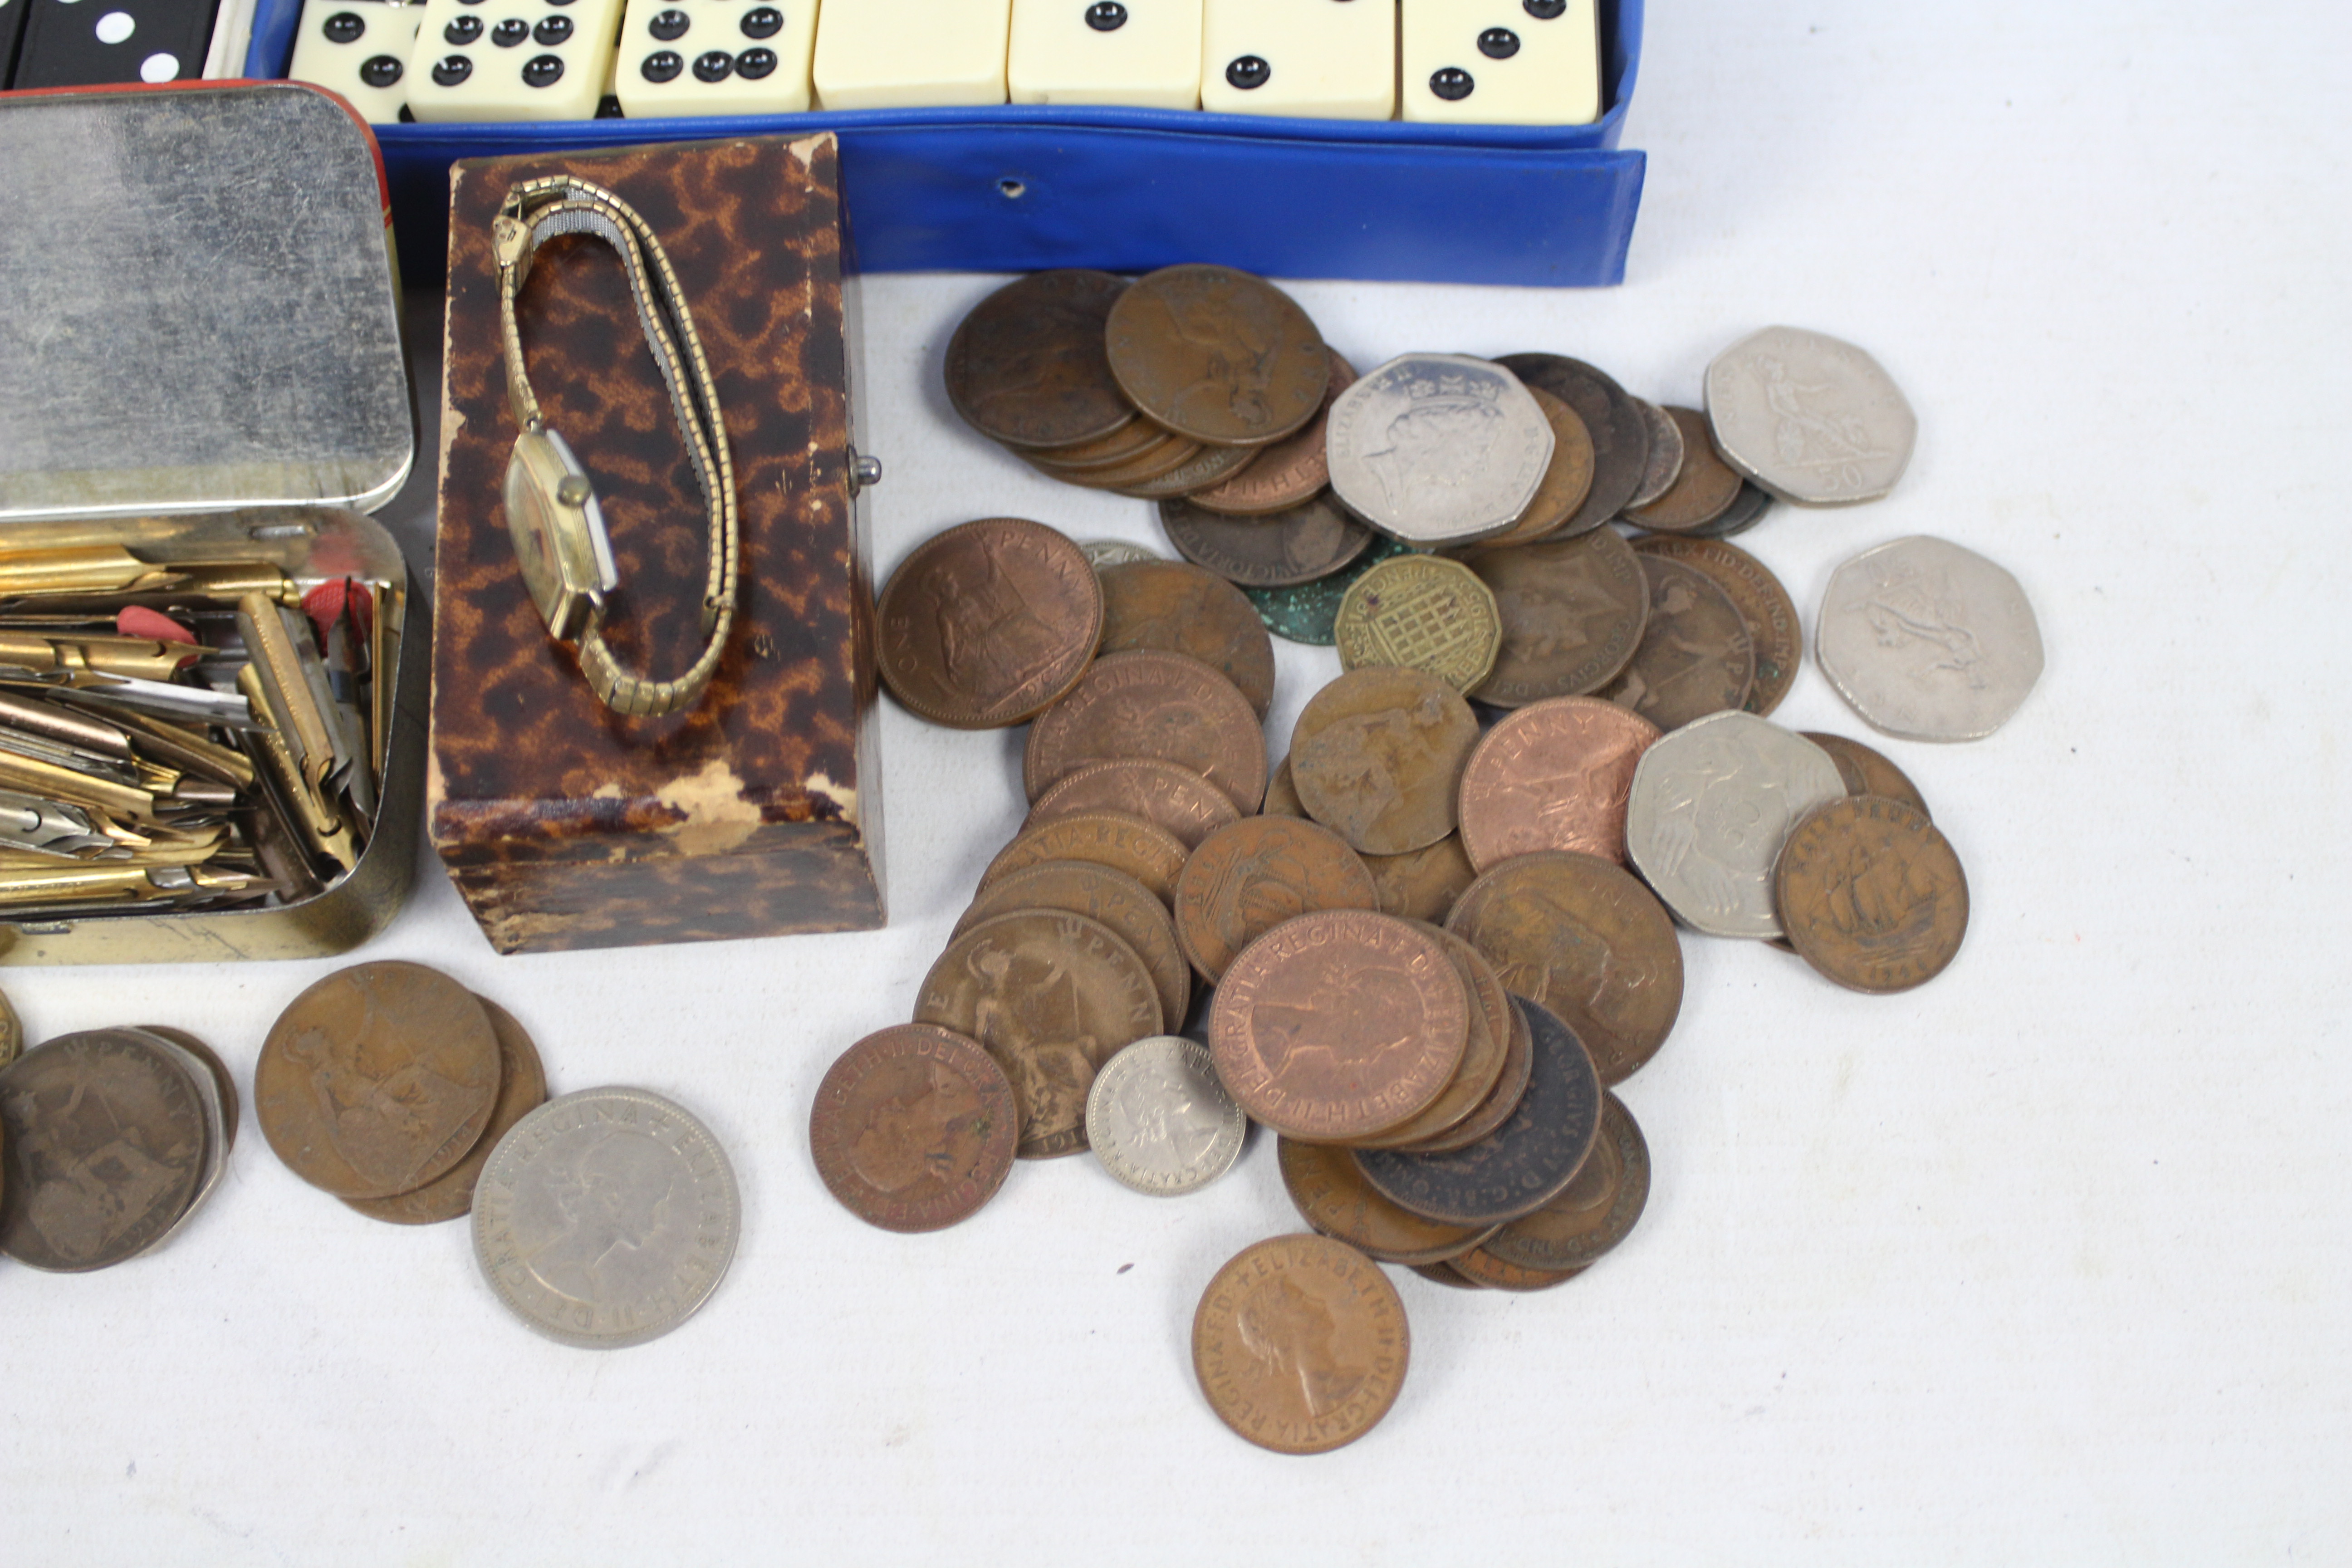 Lot to include a vintage wrist watch, two sets of double nine dominoes, playing cards, pen nibs, - Image 3 of 4